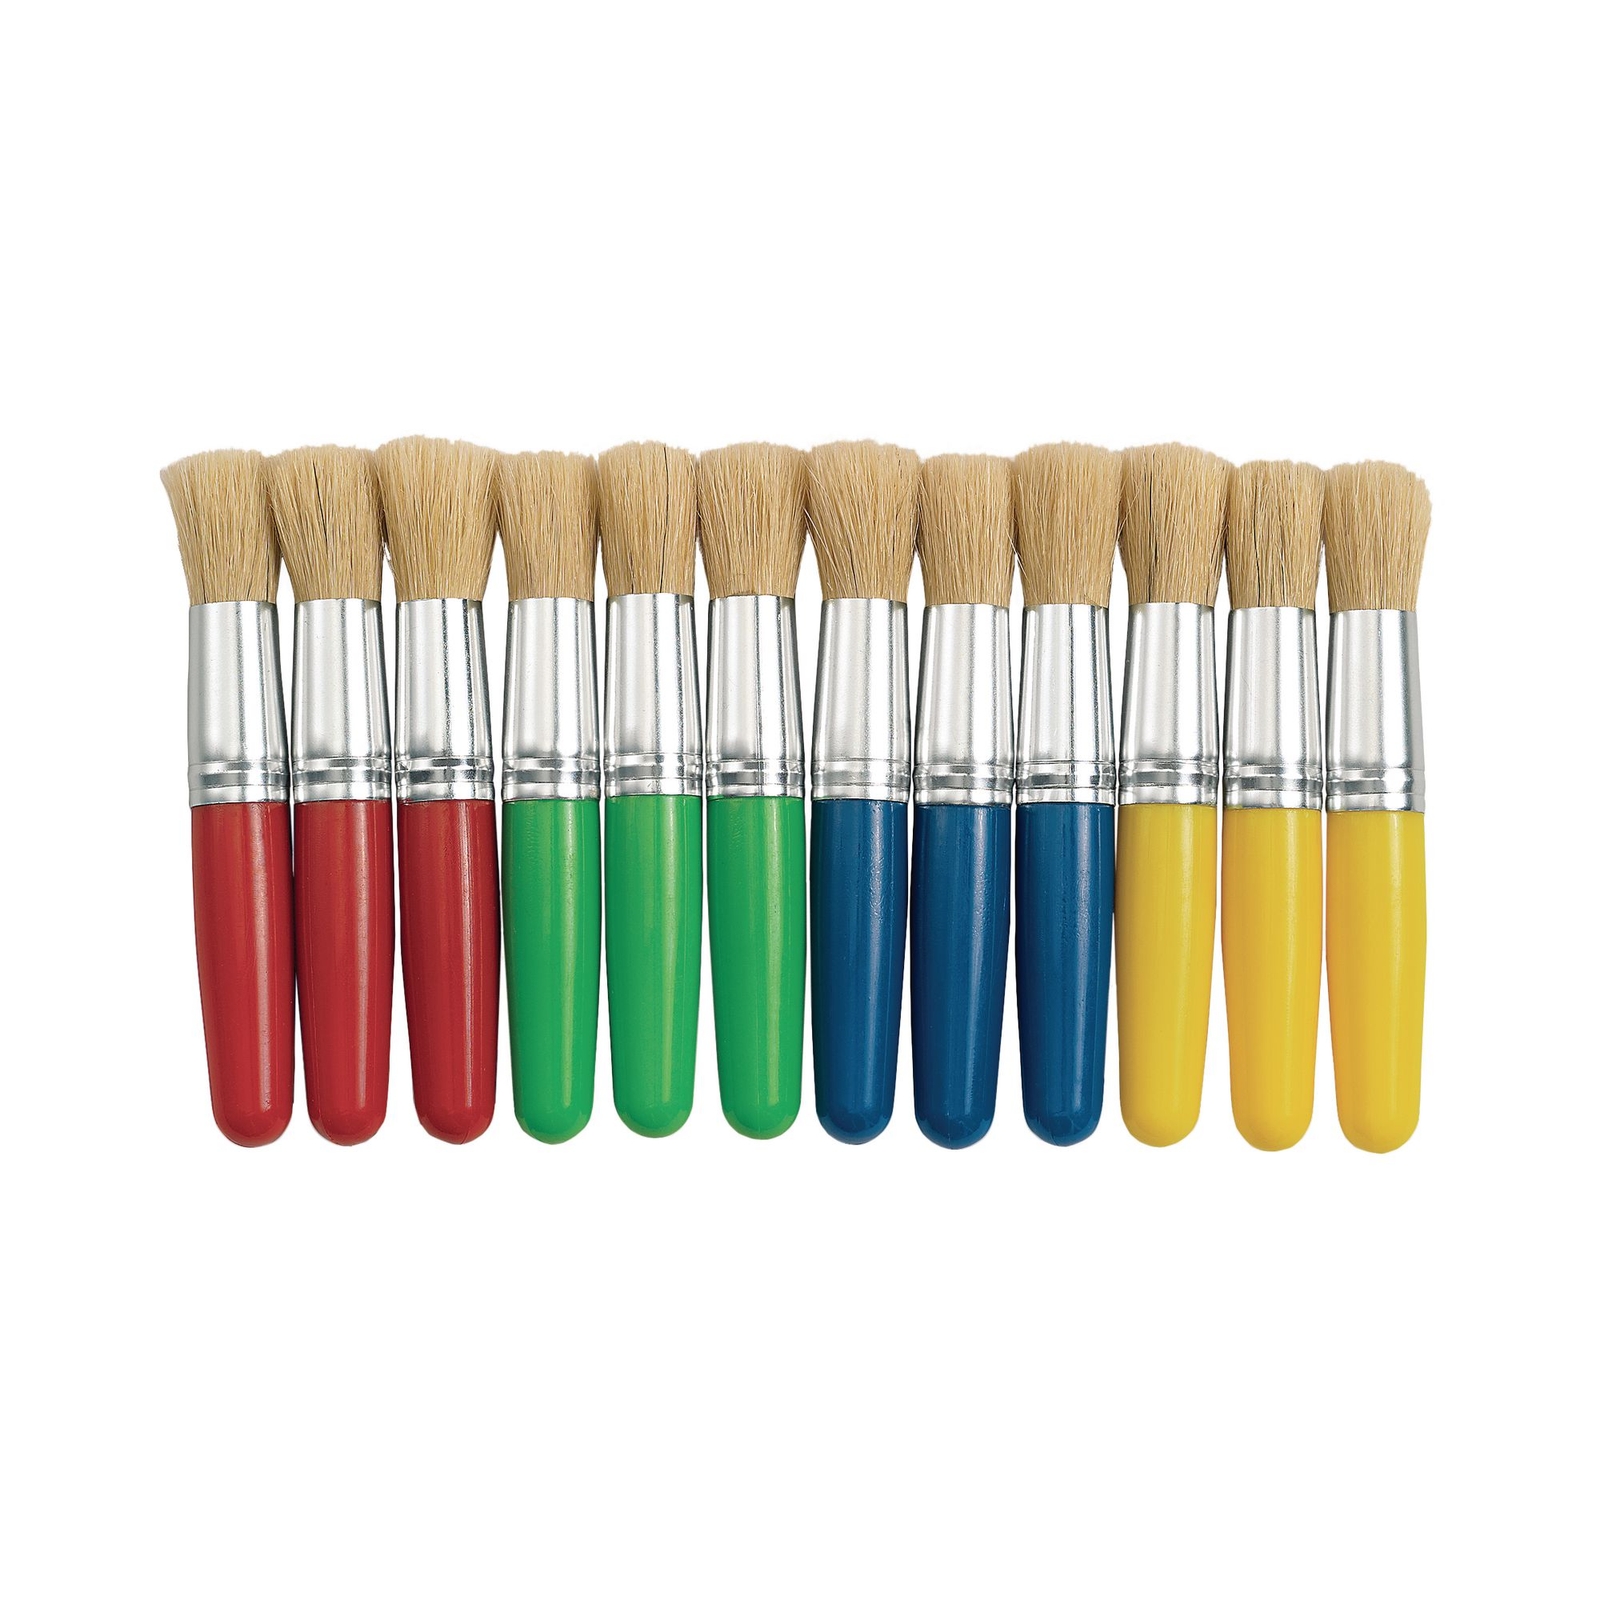 Stubby Chubby Paint Brushes - Pack of 12